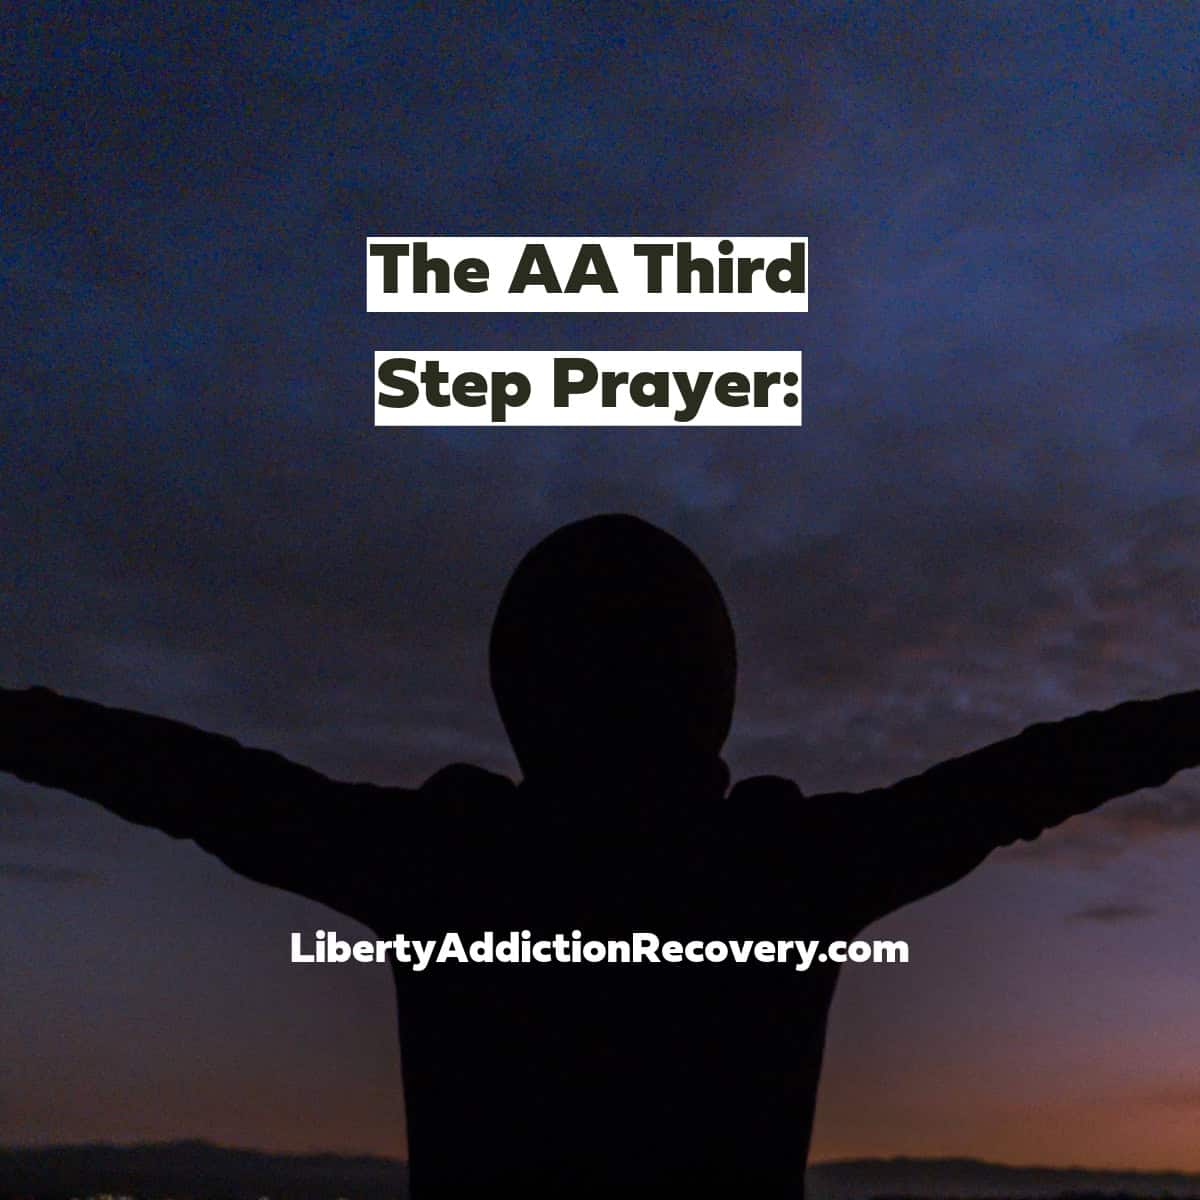 What is the AA Third Step Prayer and how to use it in real life